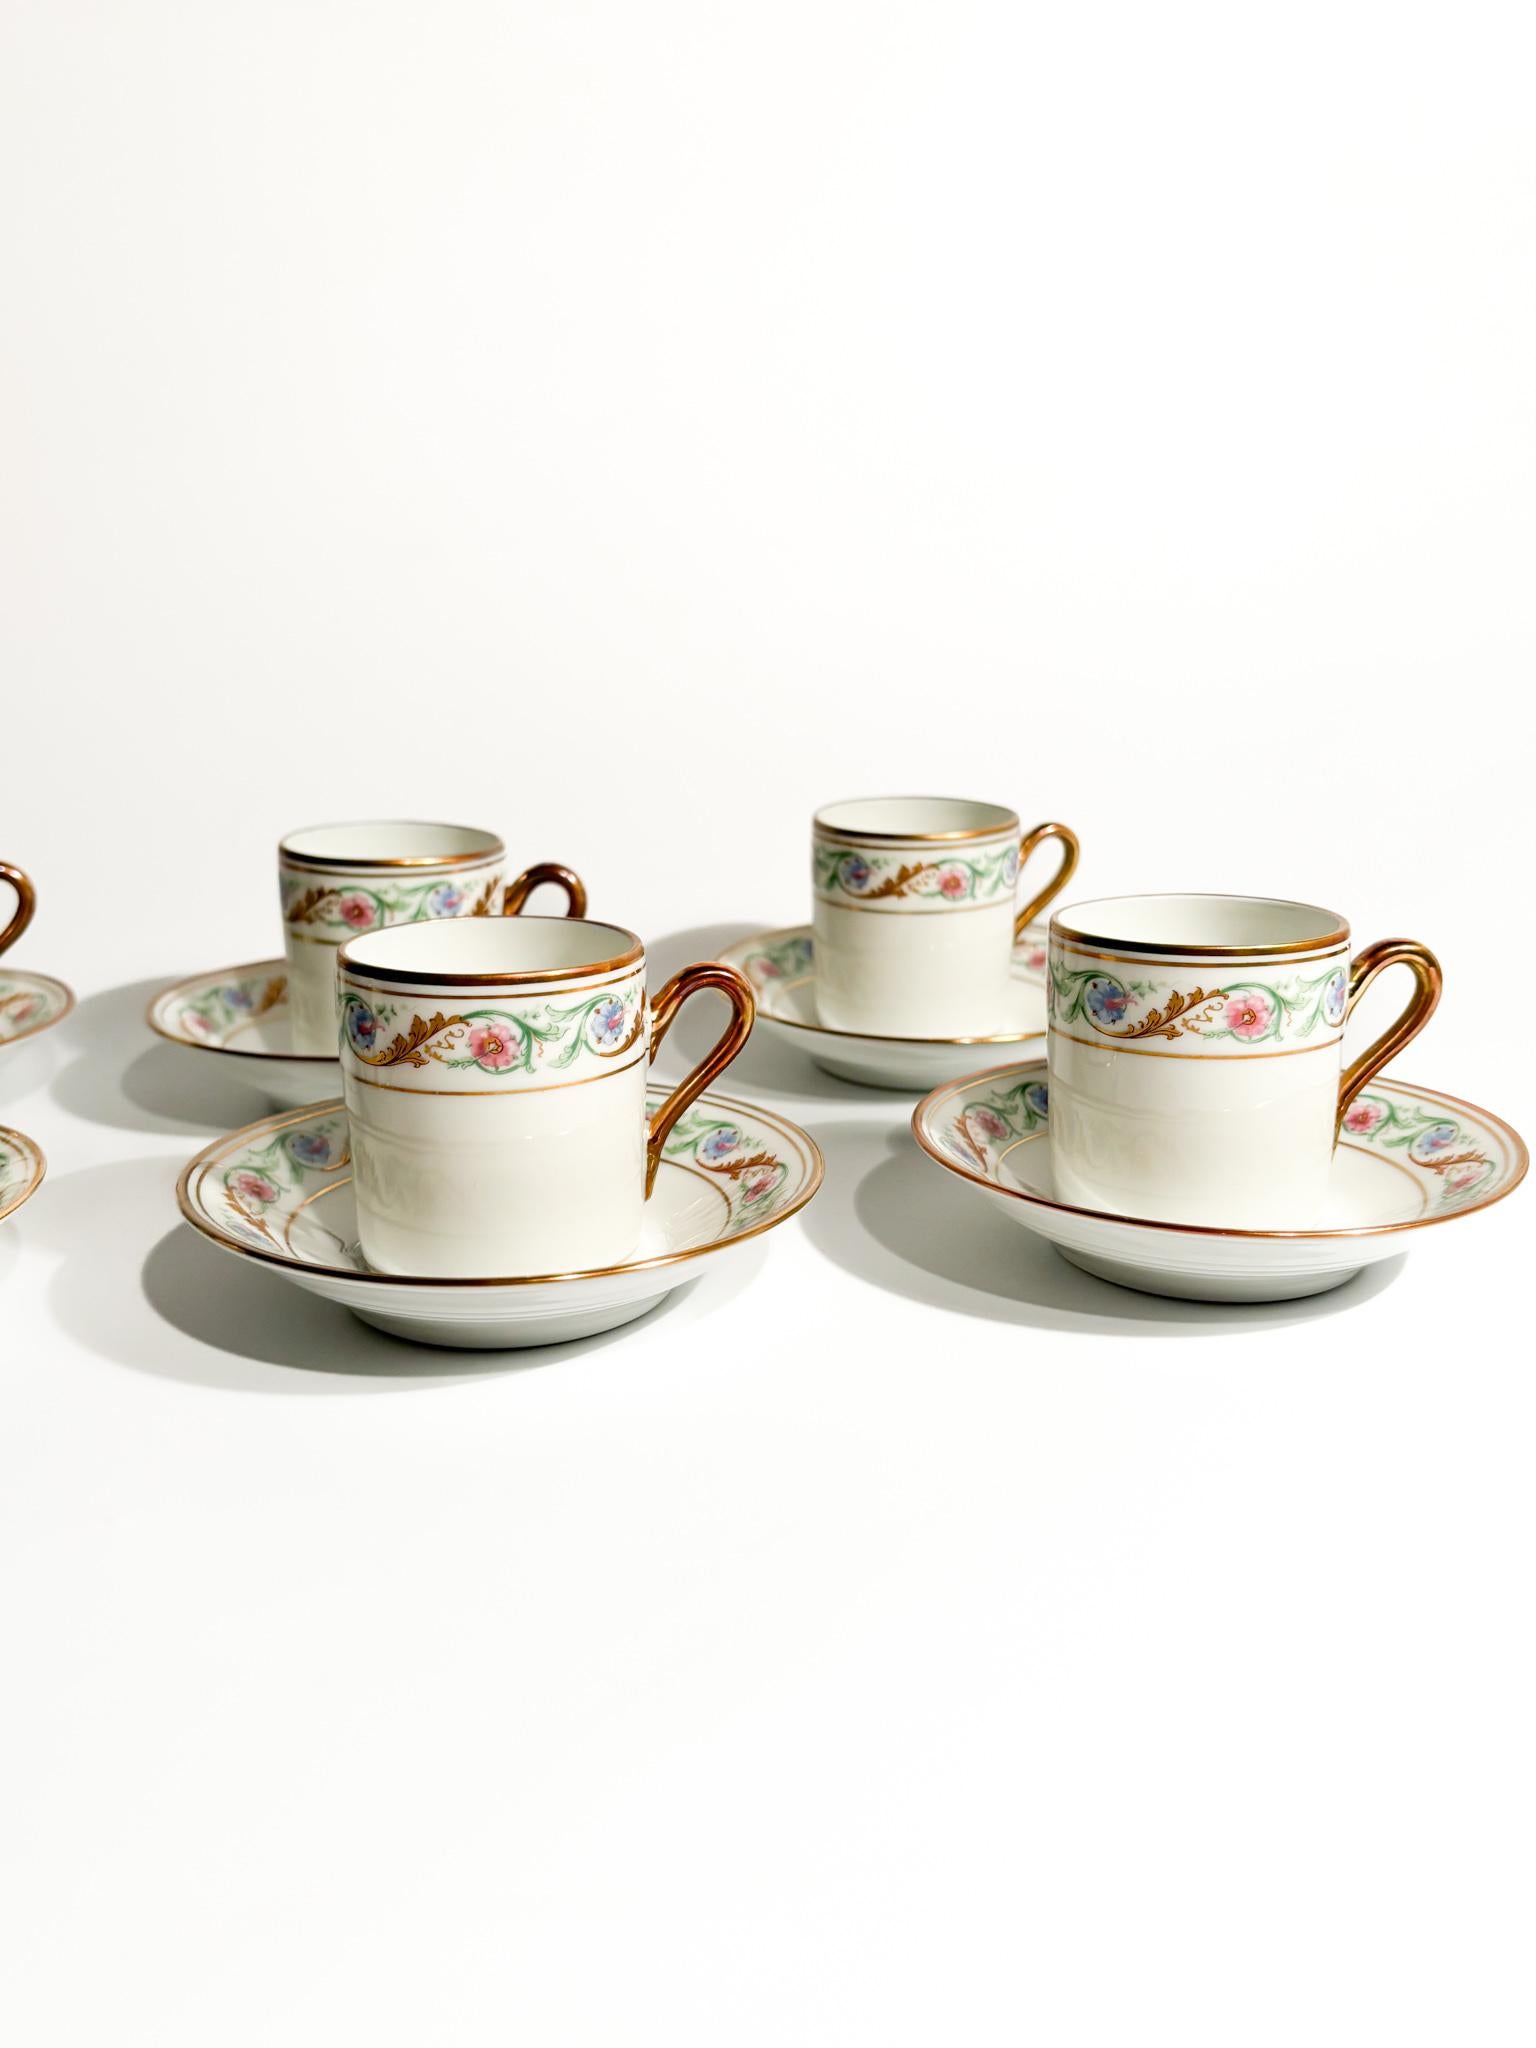 Italian Set of Six Porcelain Coffee Cups by Ginori Doccia Pittoria from the 1940s For Sale